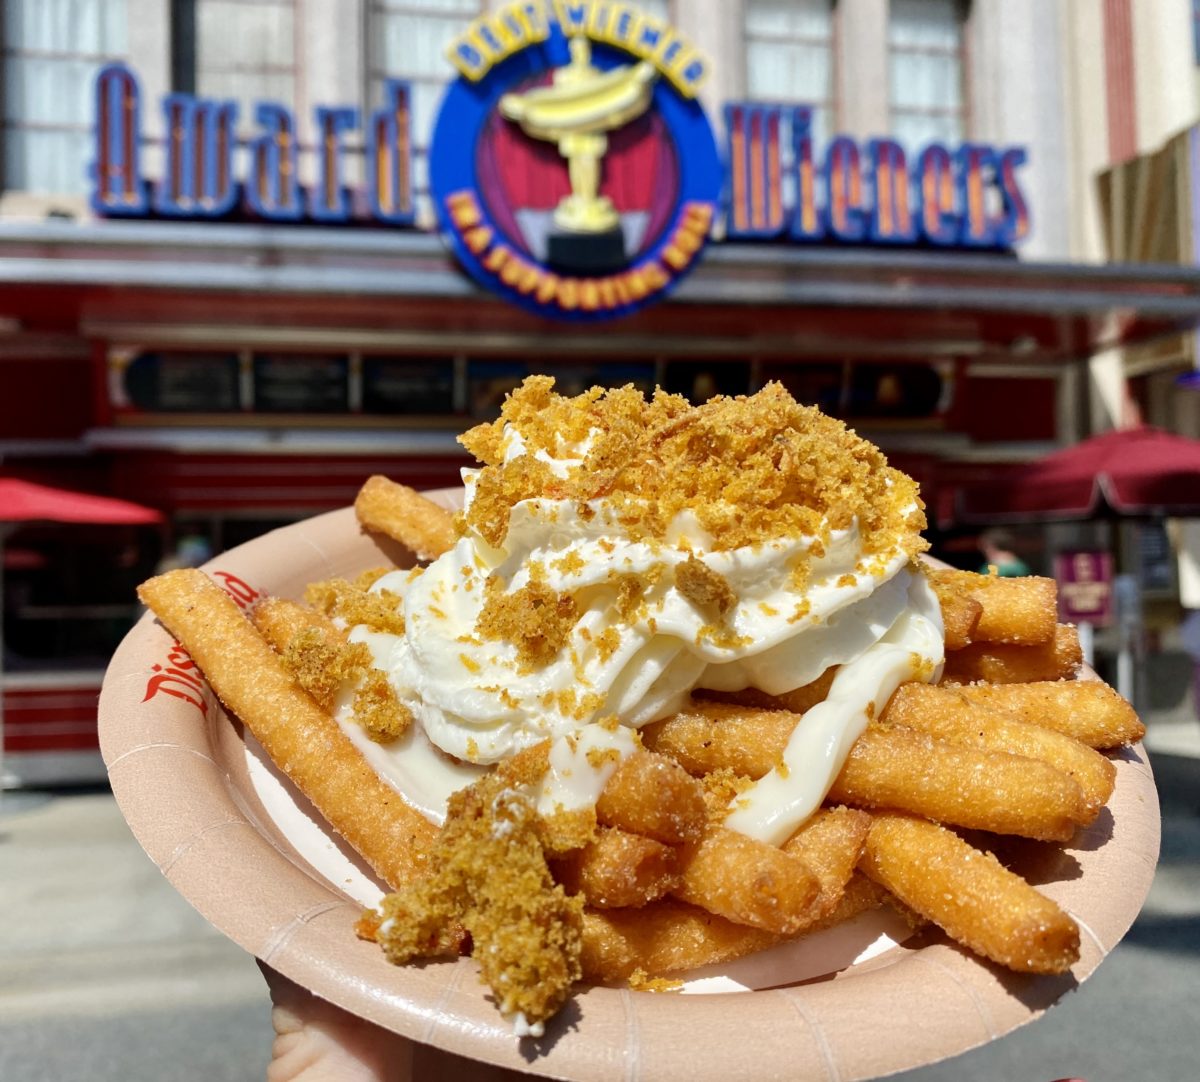 PHOTO REPORT: “A Touch of Disney” Event in Disney California Adventure  3/20/21 (New Food Items, Cars Land at Night, Physical Distancing  Preparations in Stores, and More!) - WDW News Today